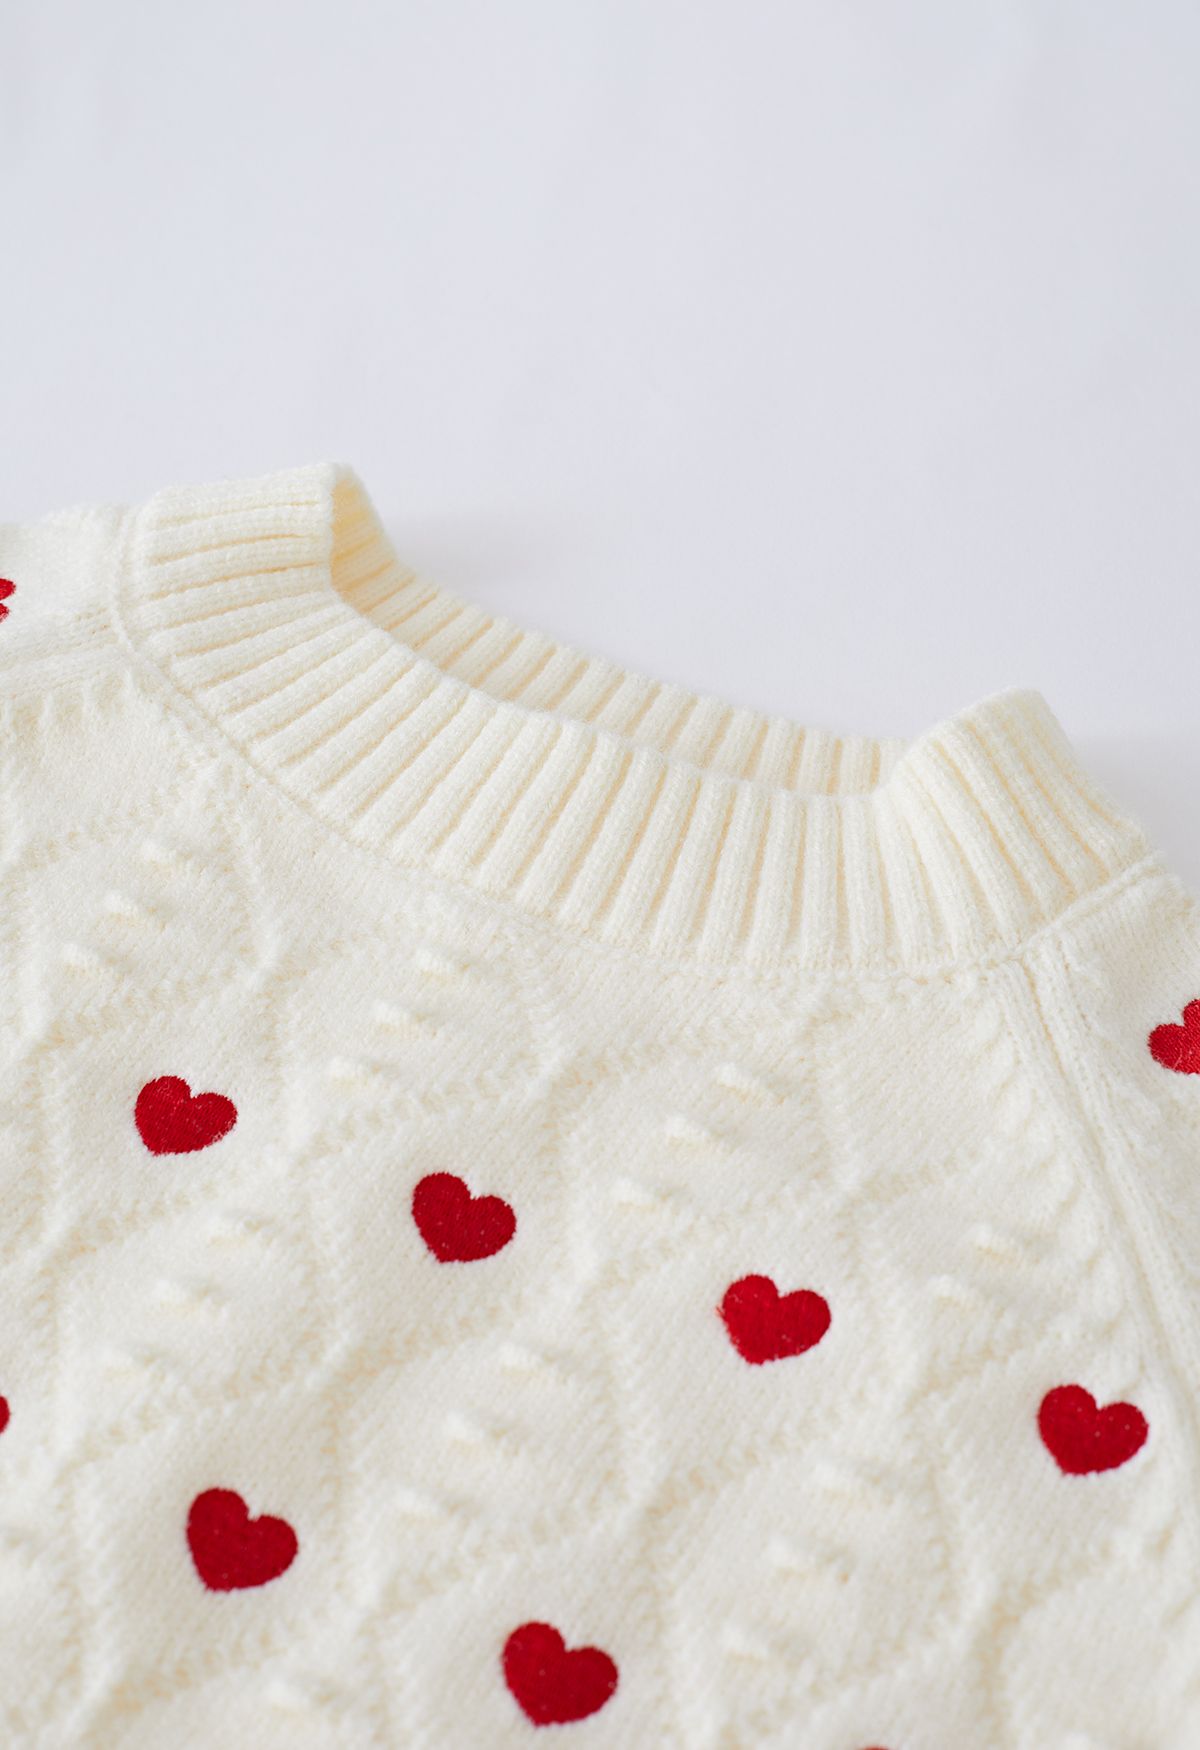 Full of Hearts Embroidered Emboss Knit Crop Sweater in Light Yellow ...